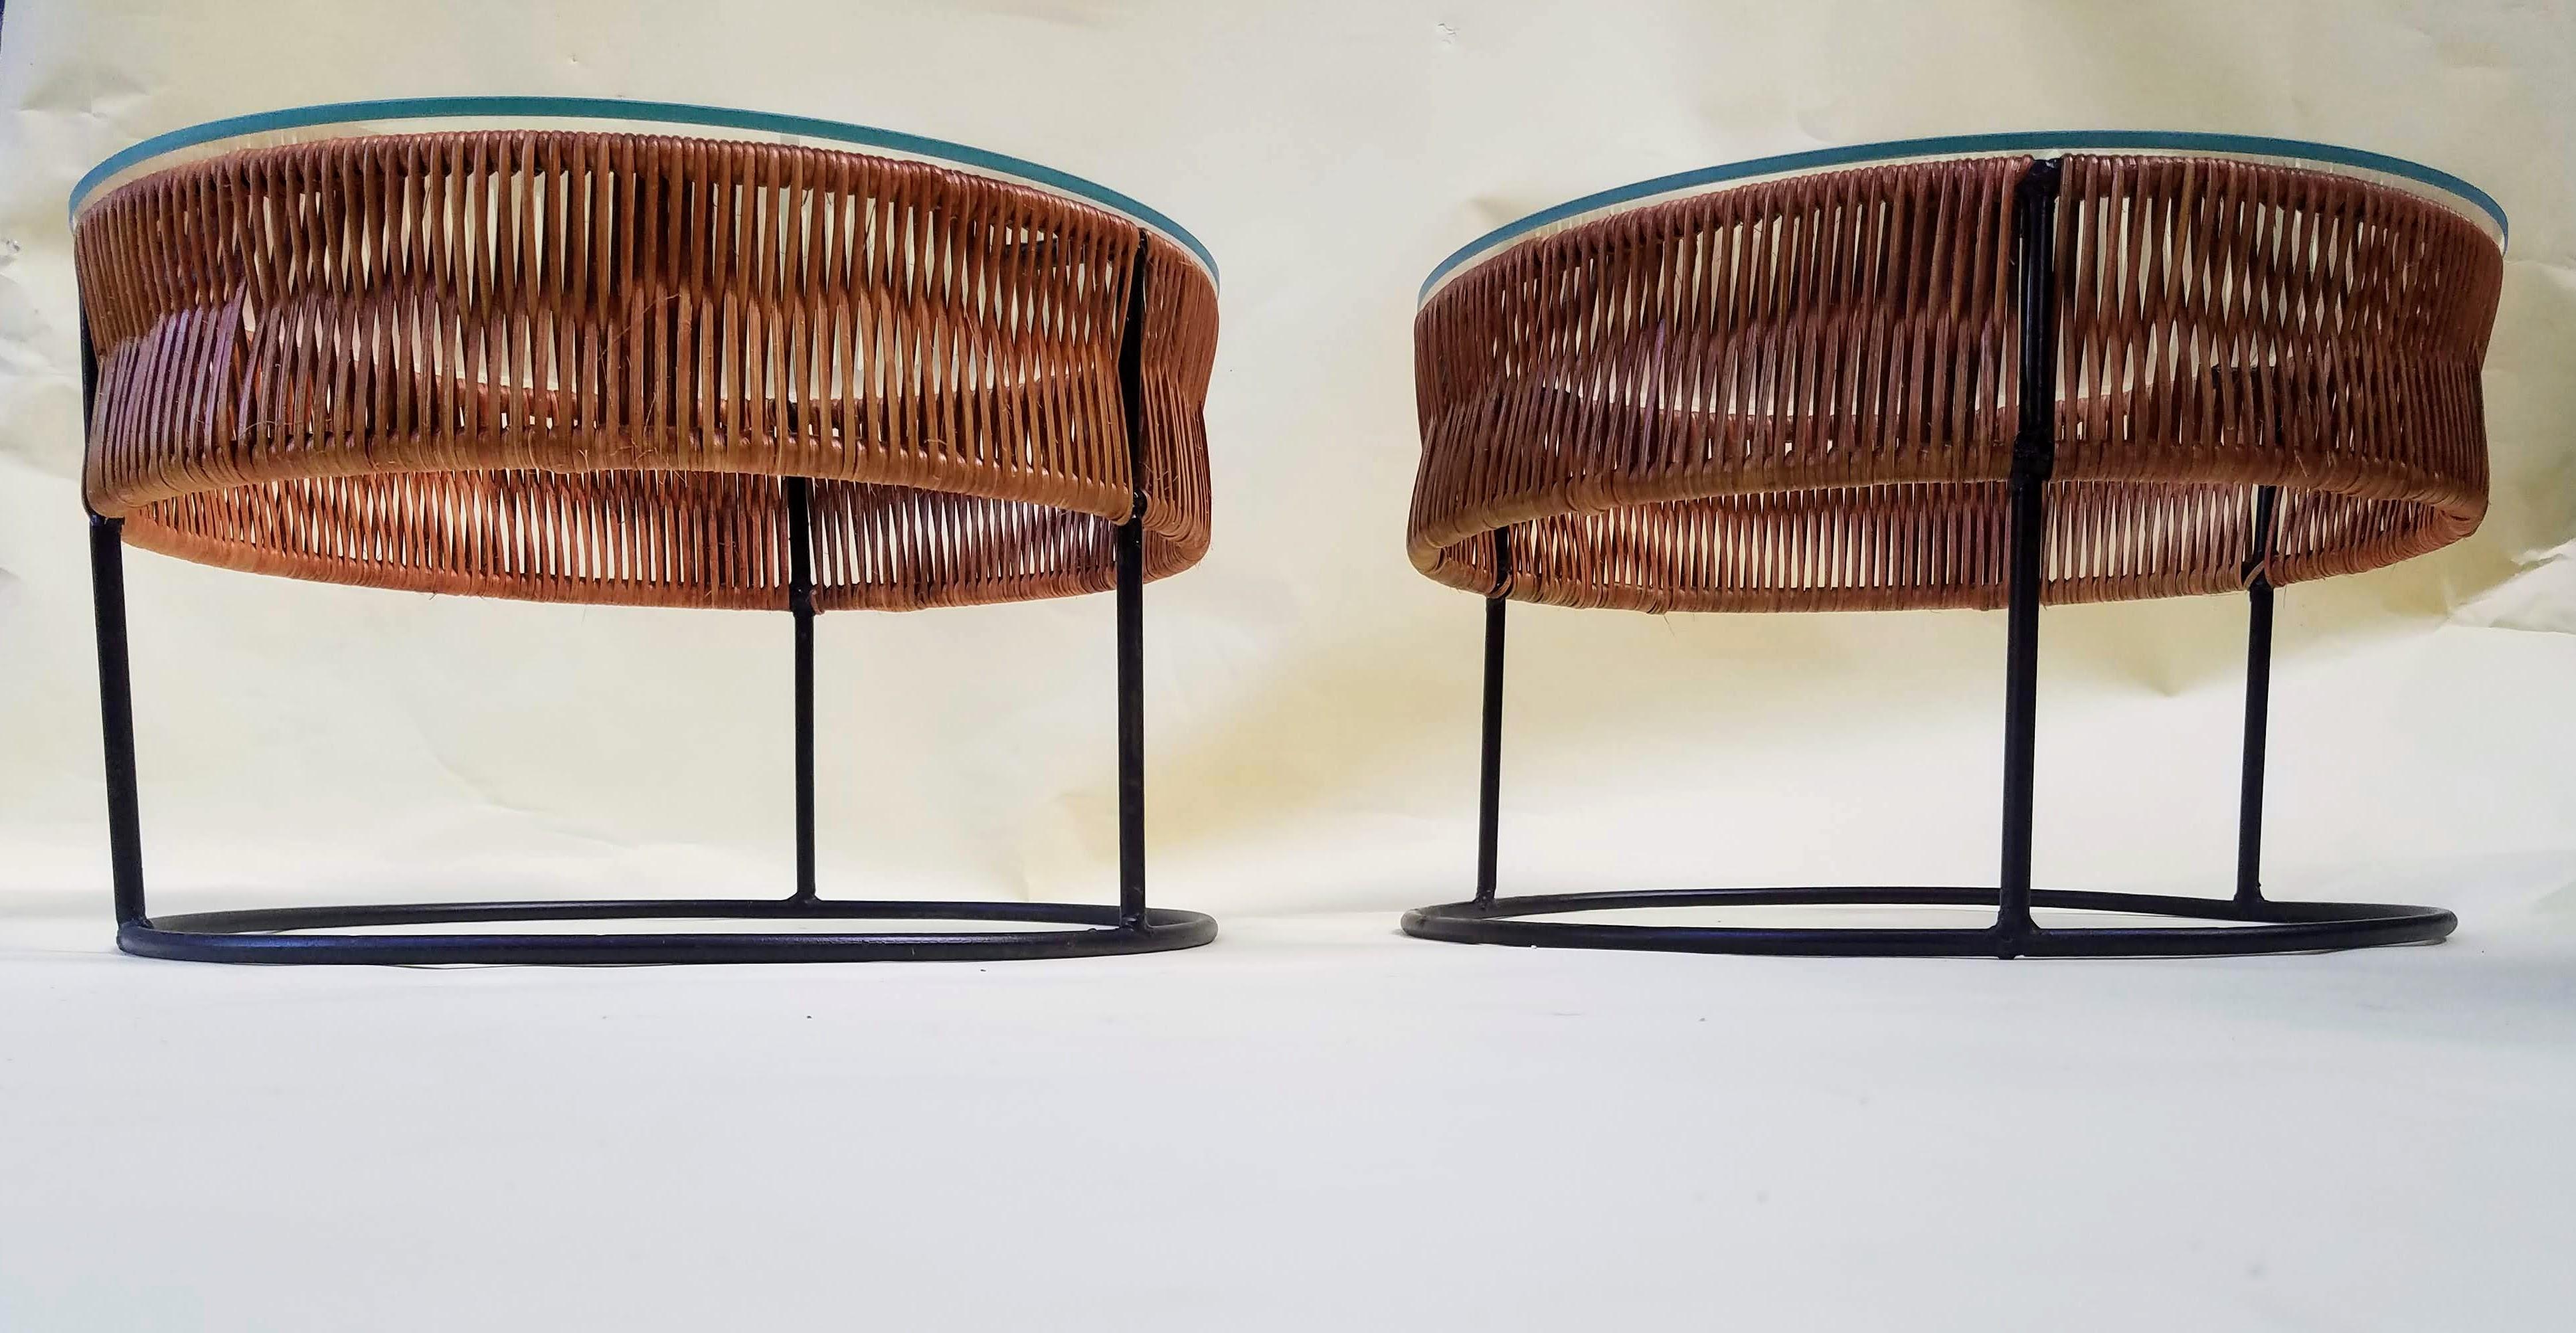 Caning Pair of Wrought Iron and Bamboo End Tables / Stools Arthur Umanoff 1960